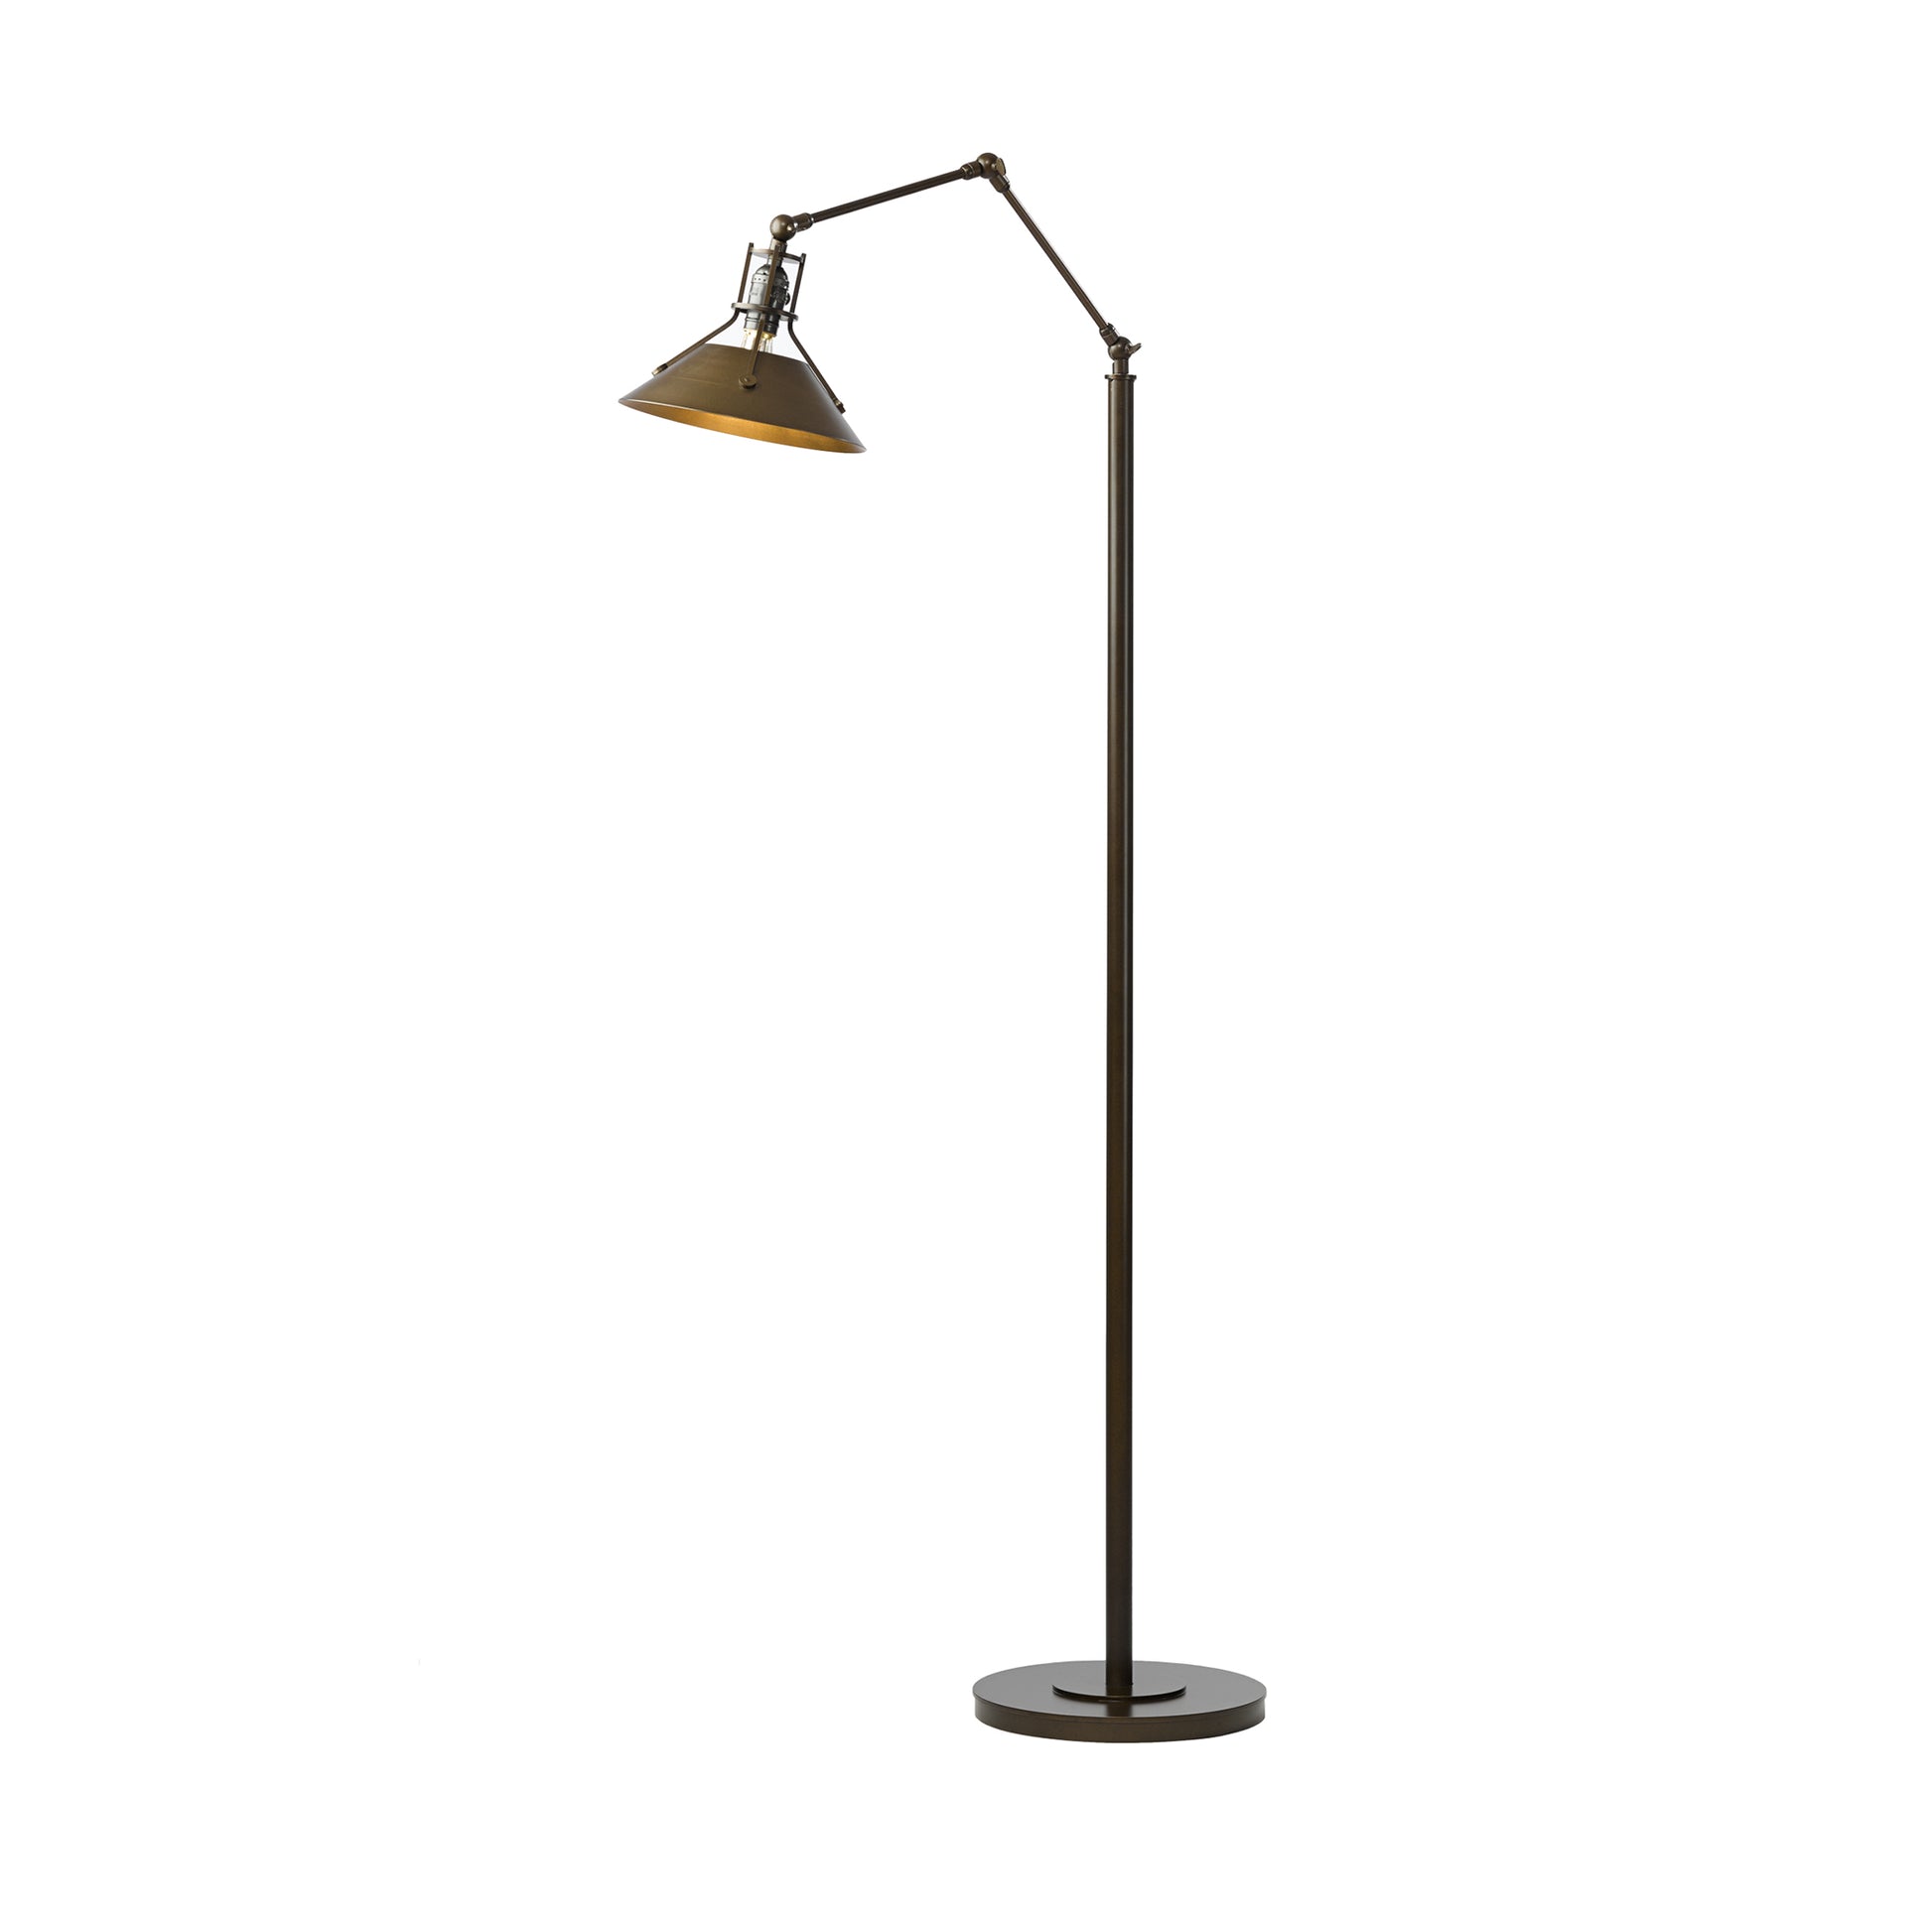 The Hubbardton Forge Henry Floor Lamp features an industrial design, with a metal shade that beautifully contrasts against the white background.